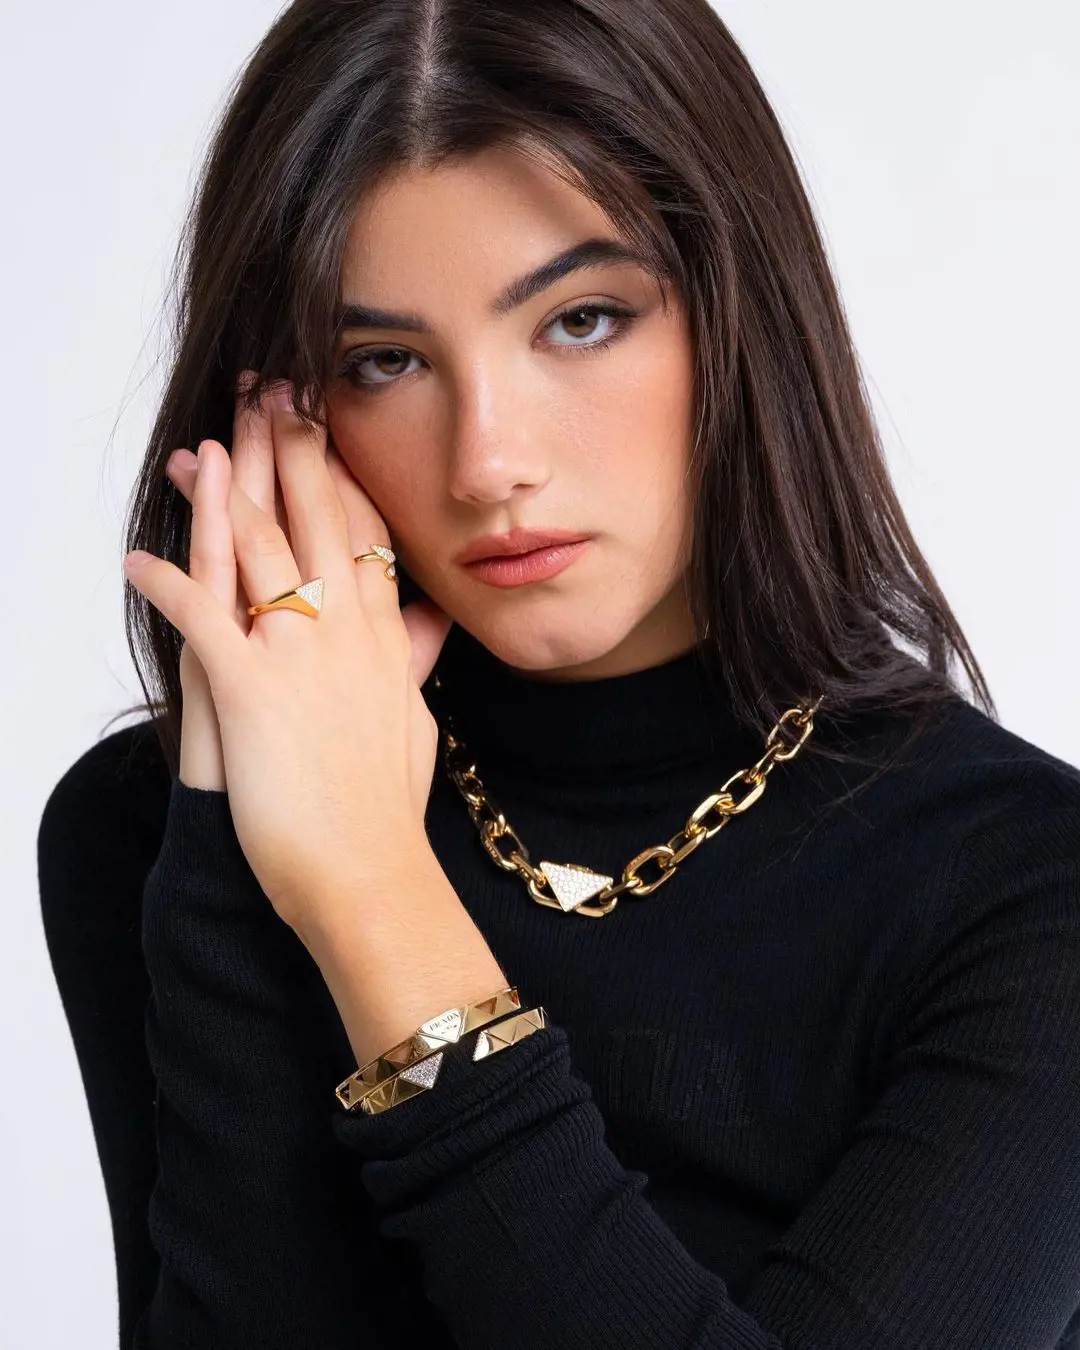 Charli flaunting 100% recycled and sustainable gold from luxury brand Prada's eternal gold collection. 